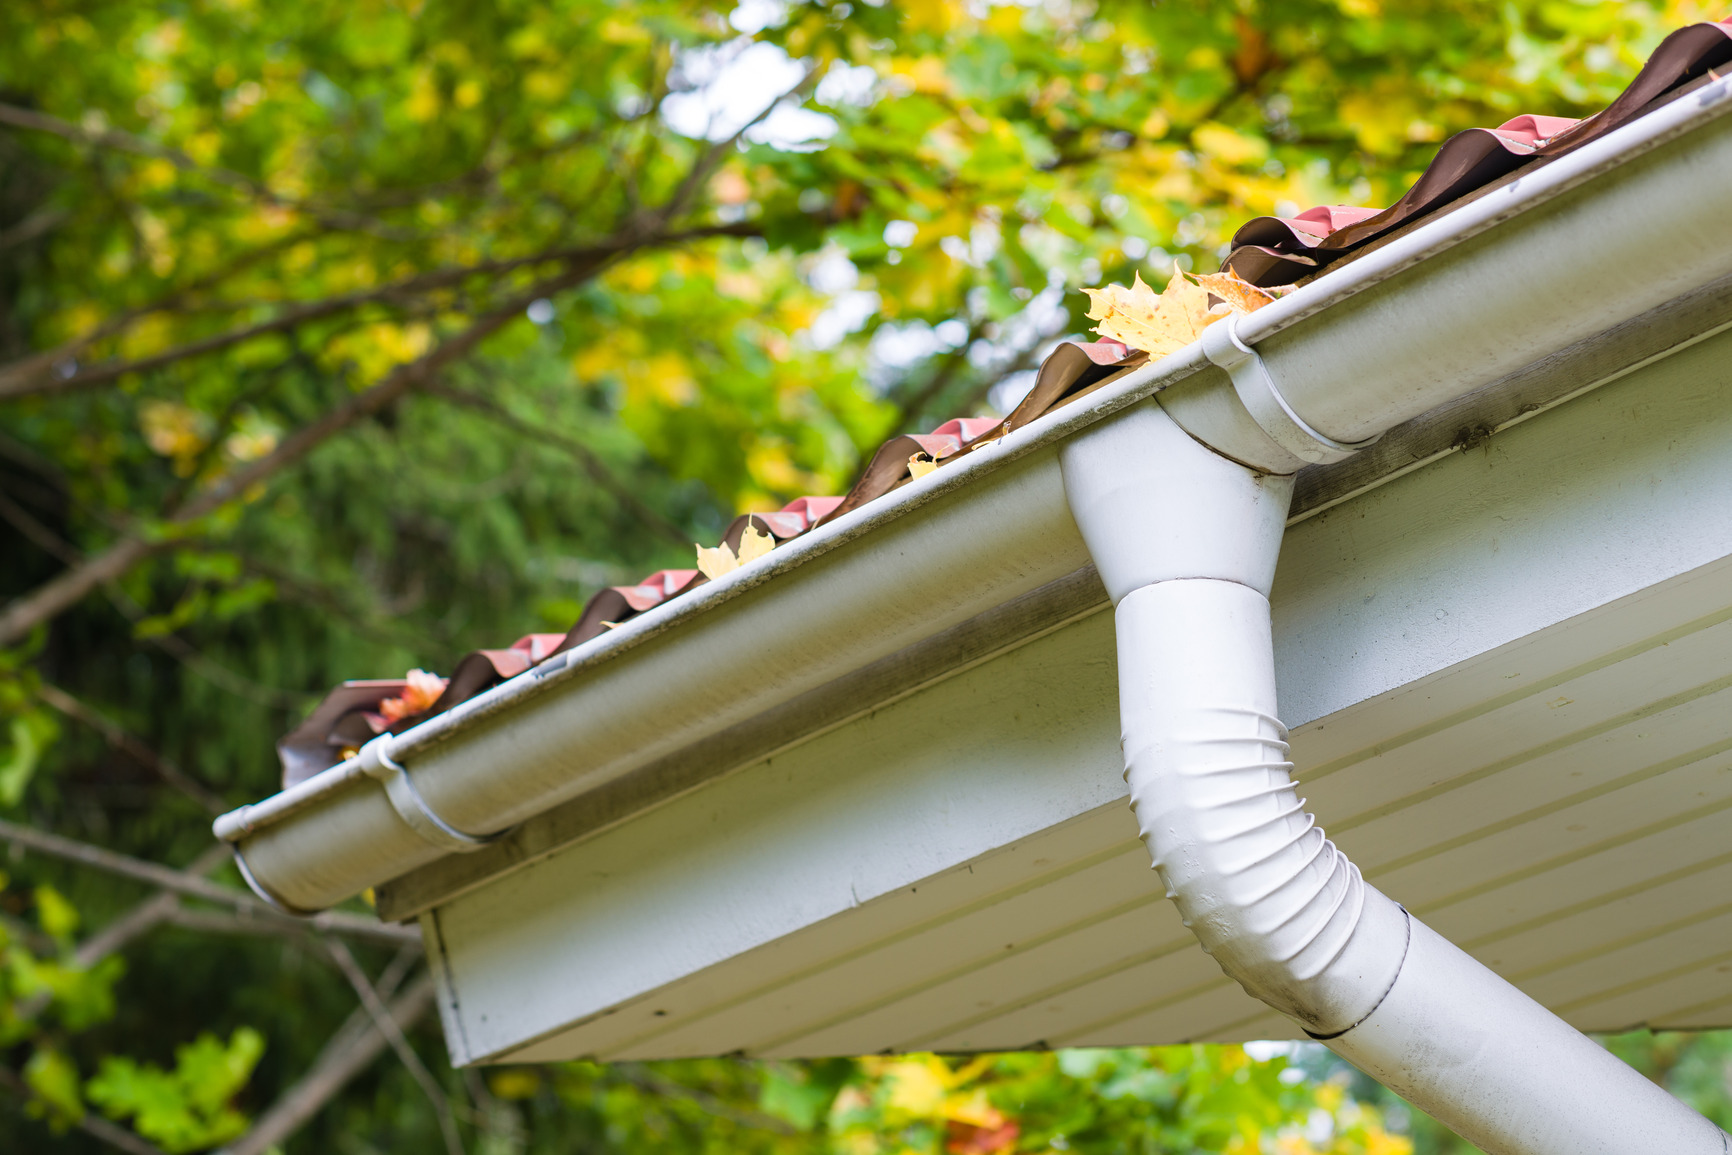 Gutter Cleaning Services in Scarsdale NY